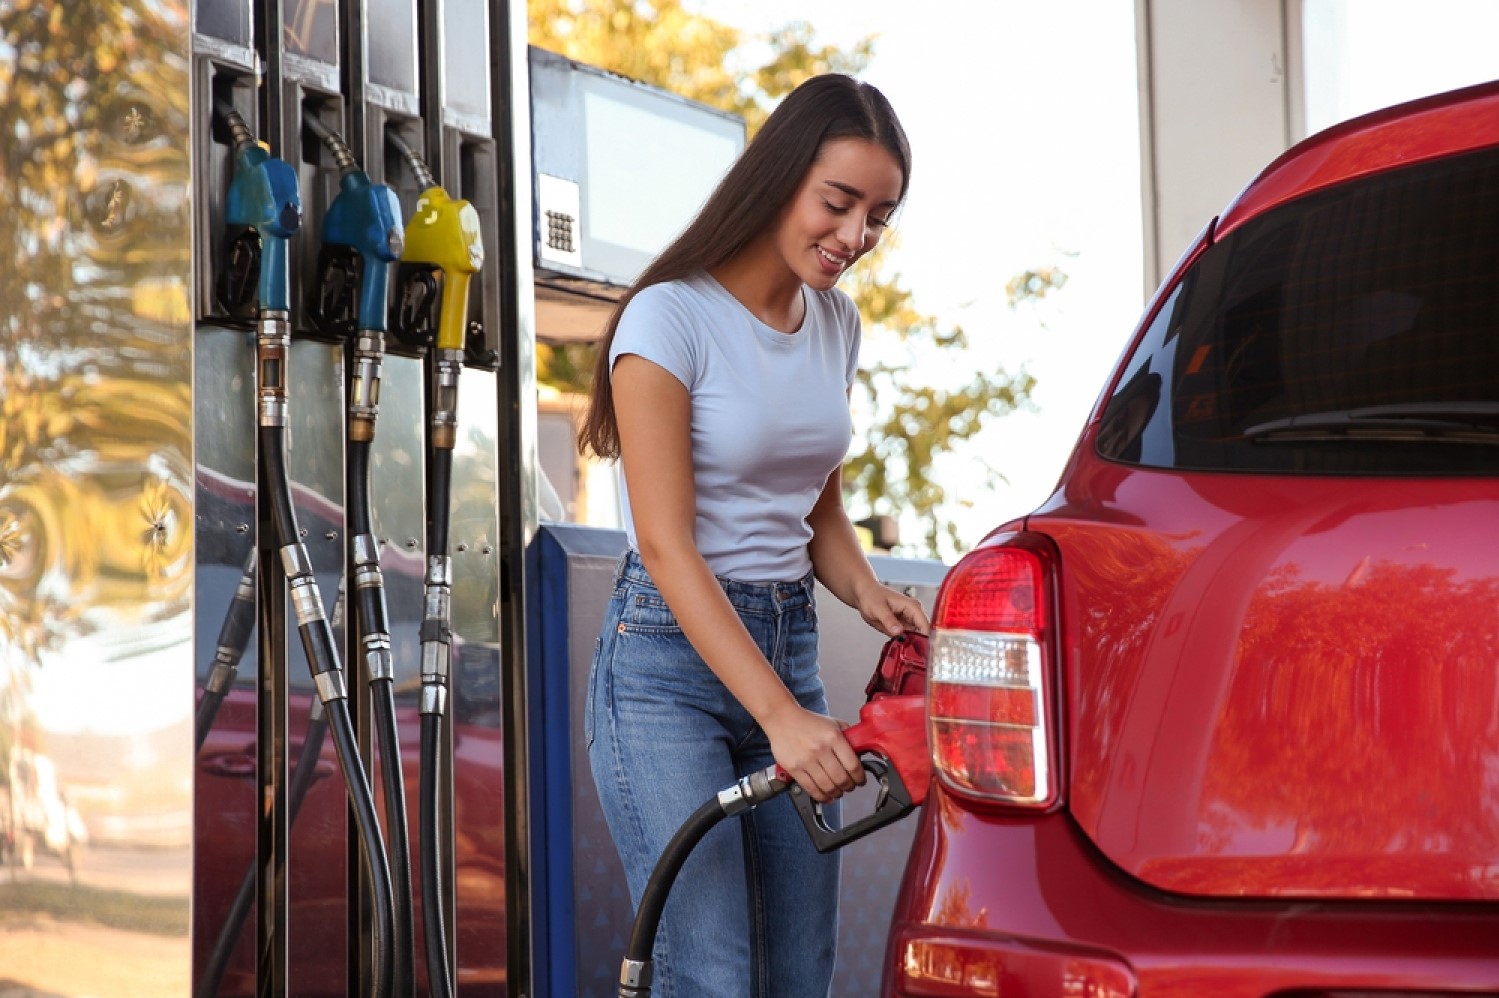 stock-photo-young-woman-refueling-car-at-self-service-gas-station-1844880265-transformed